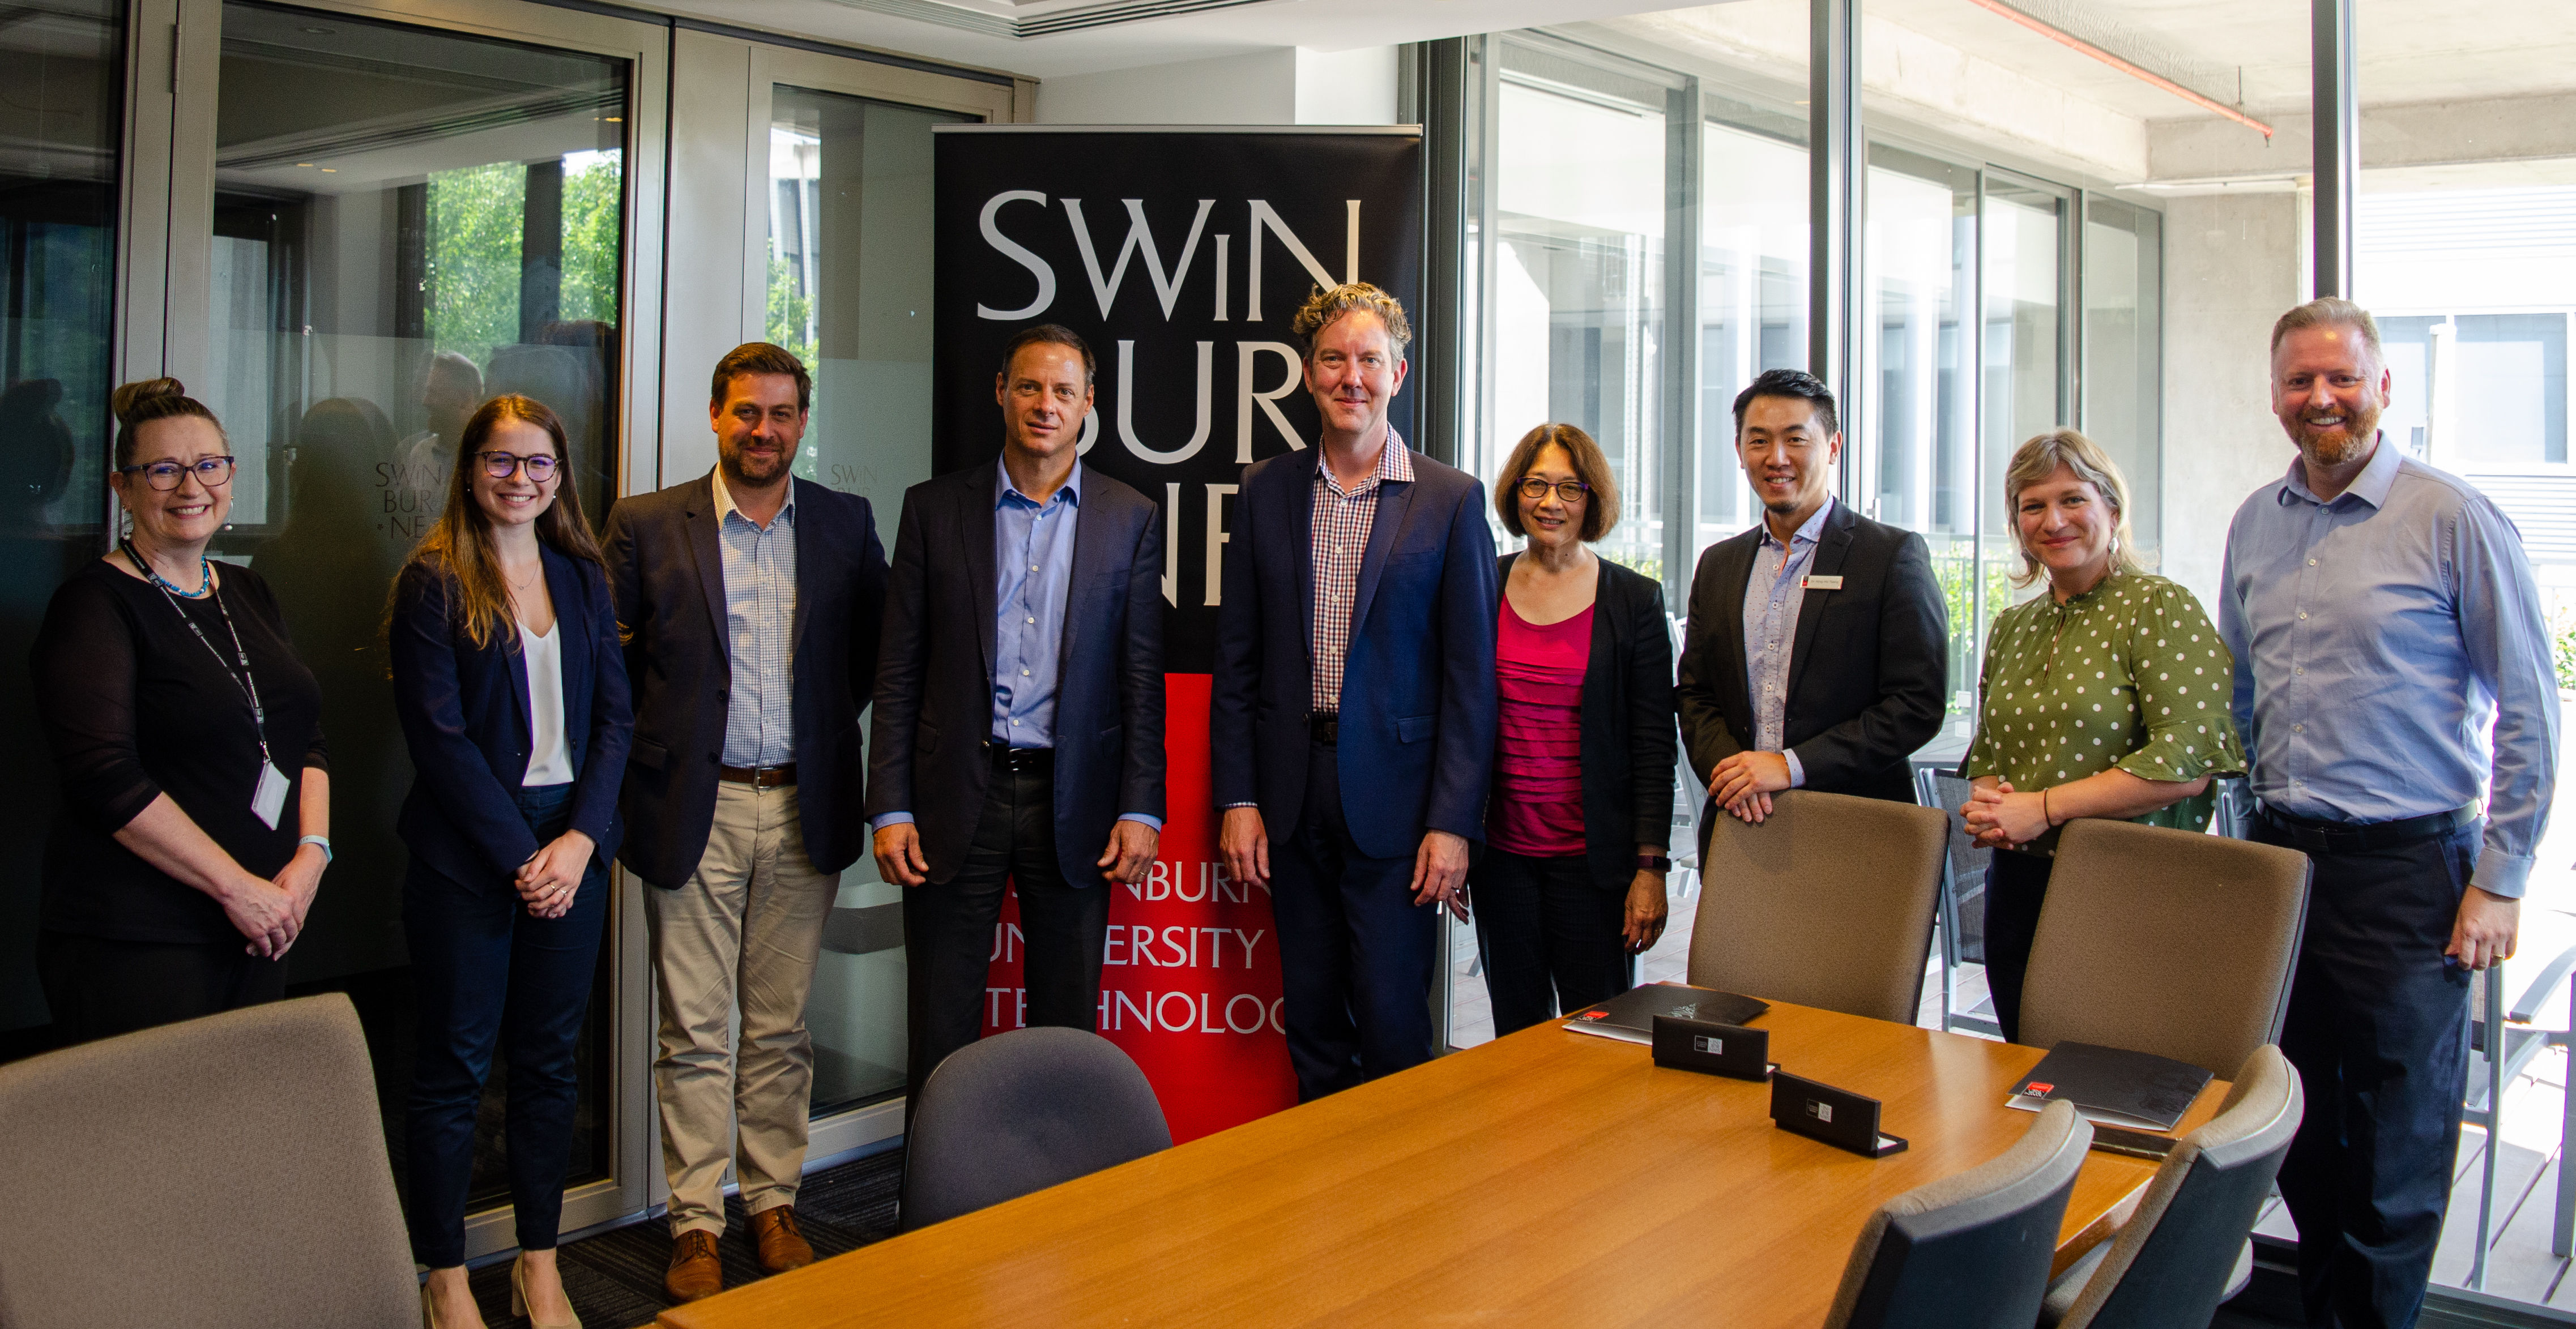 Representatives from Swinburne and BYCA standing behind a Swinburne banner in a meeting room. 